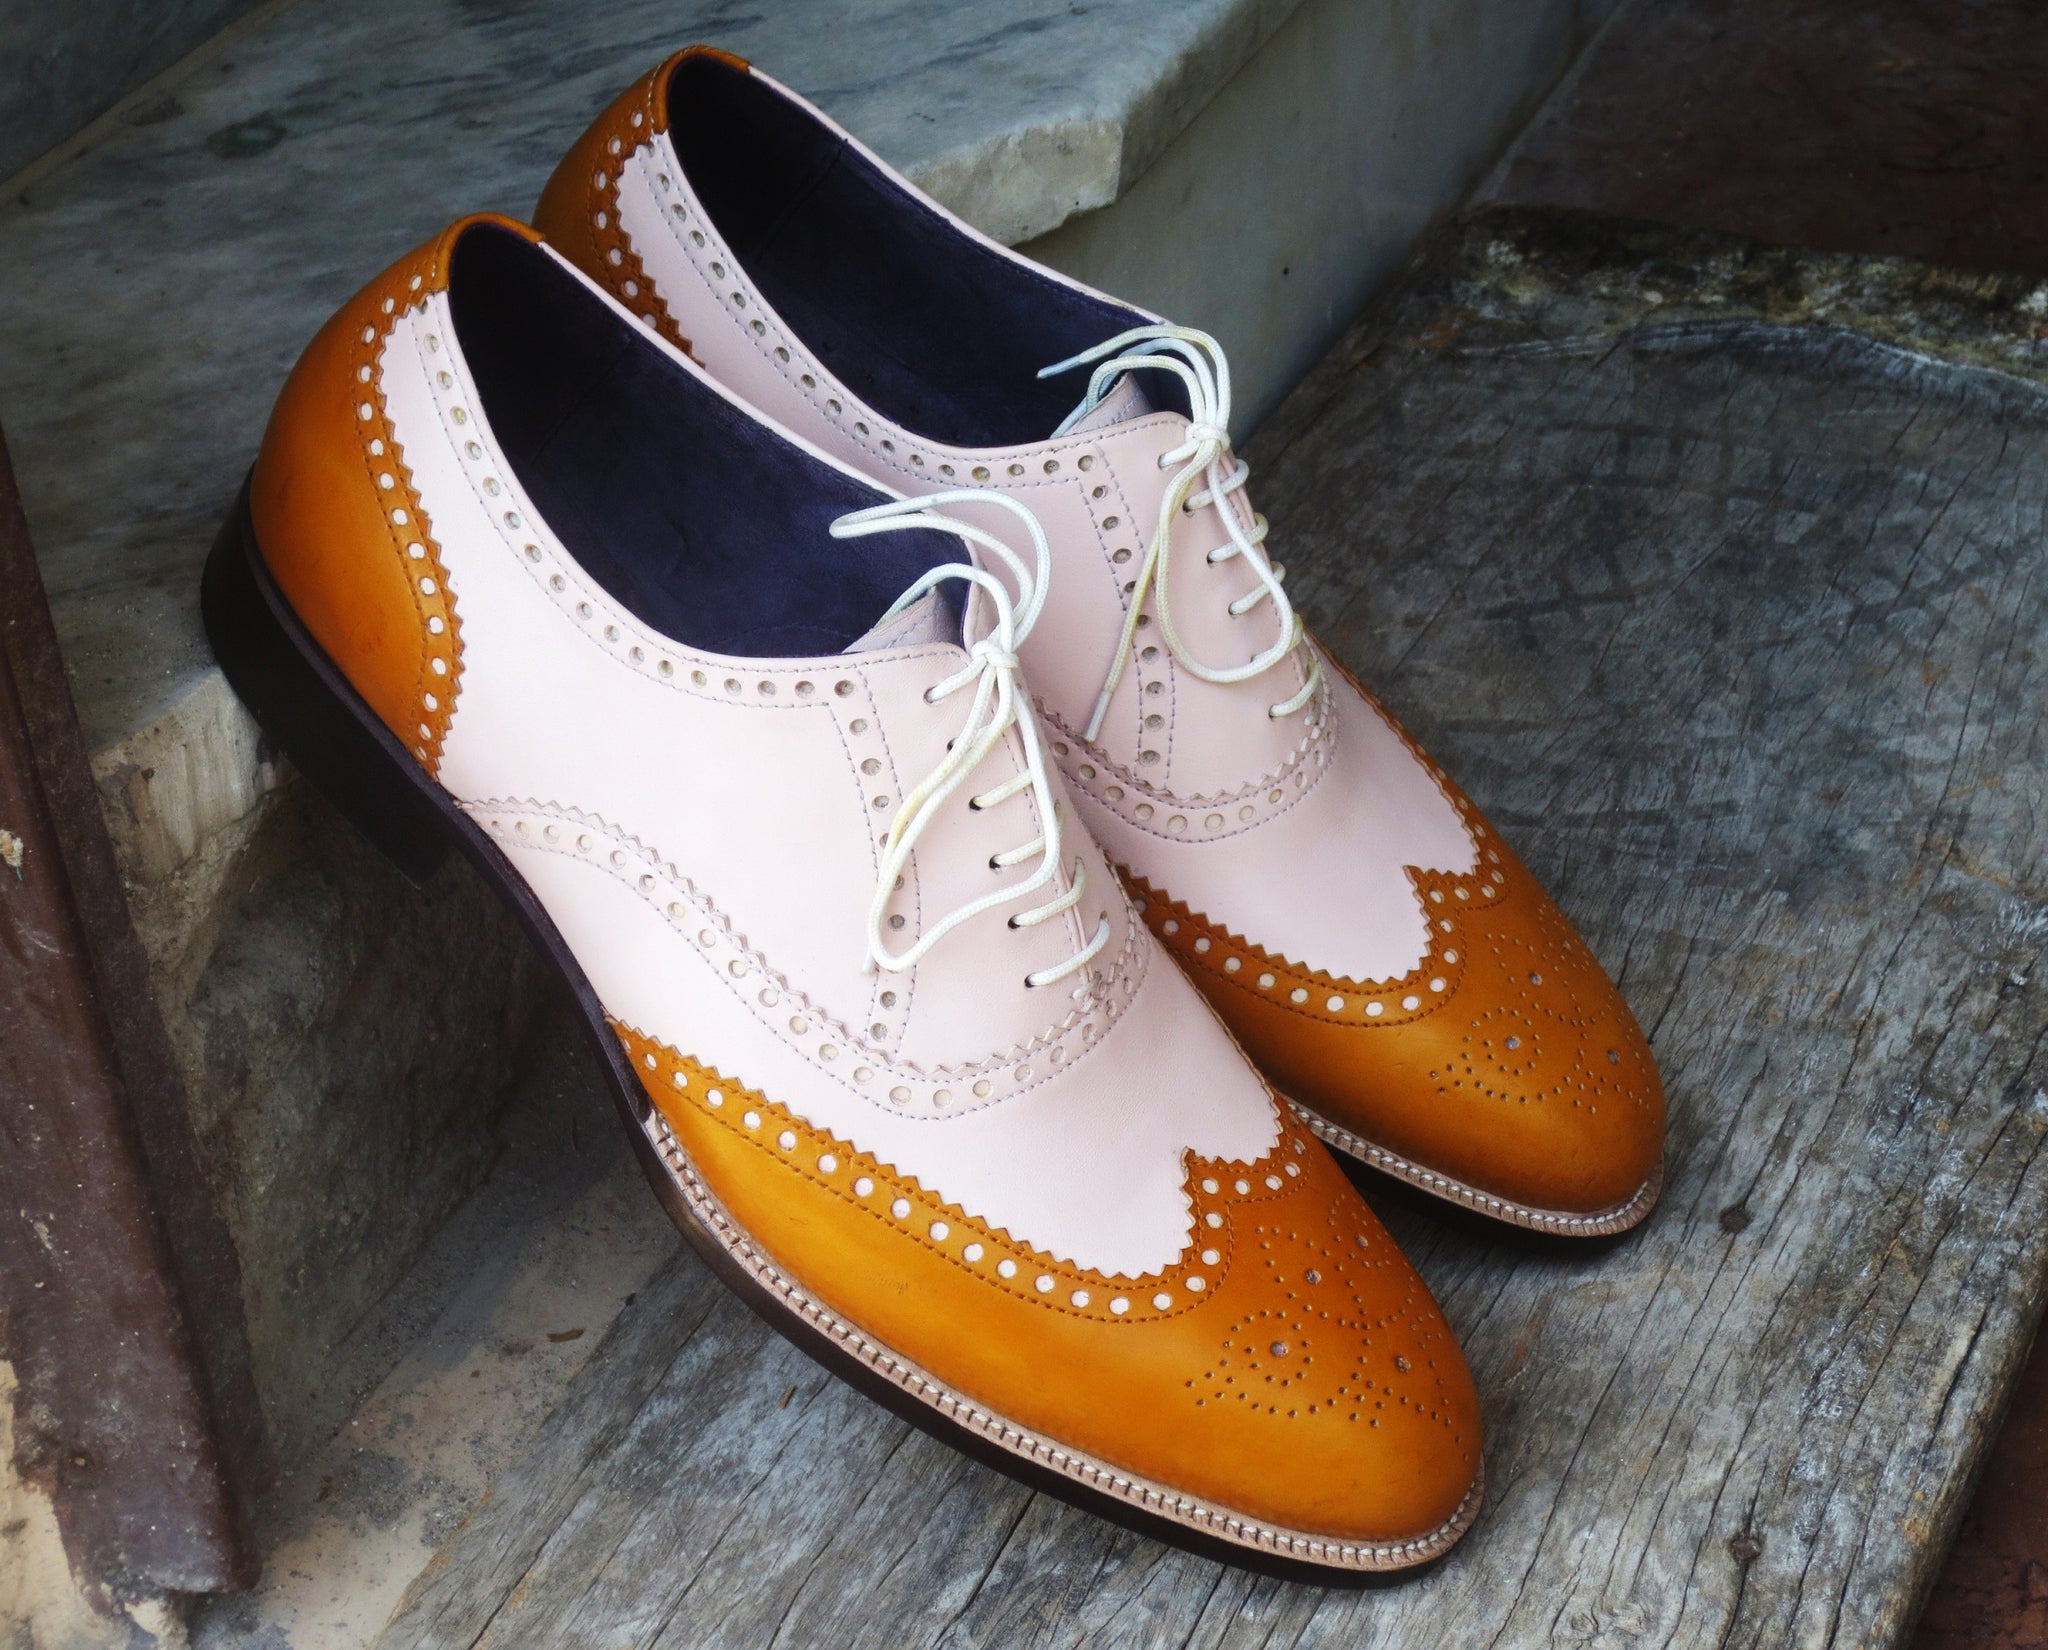 Handmade Men's White Tan Leather Wing Tip Brogue Shoes, Men